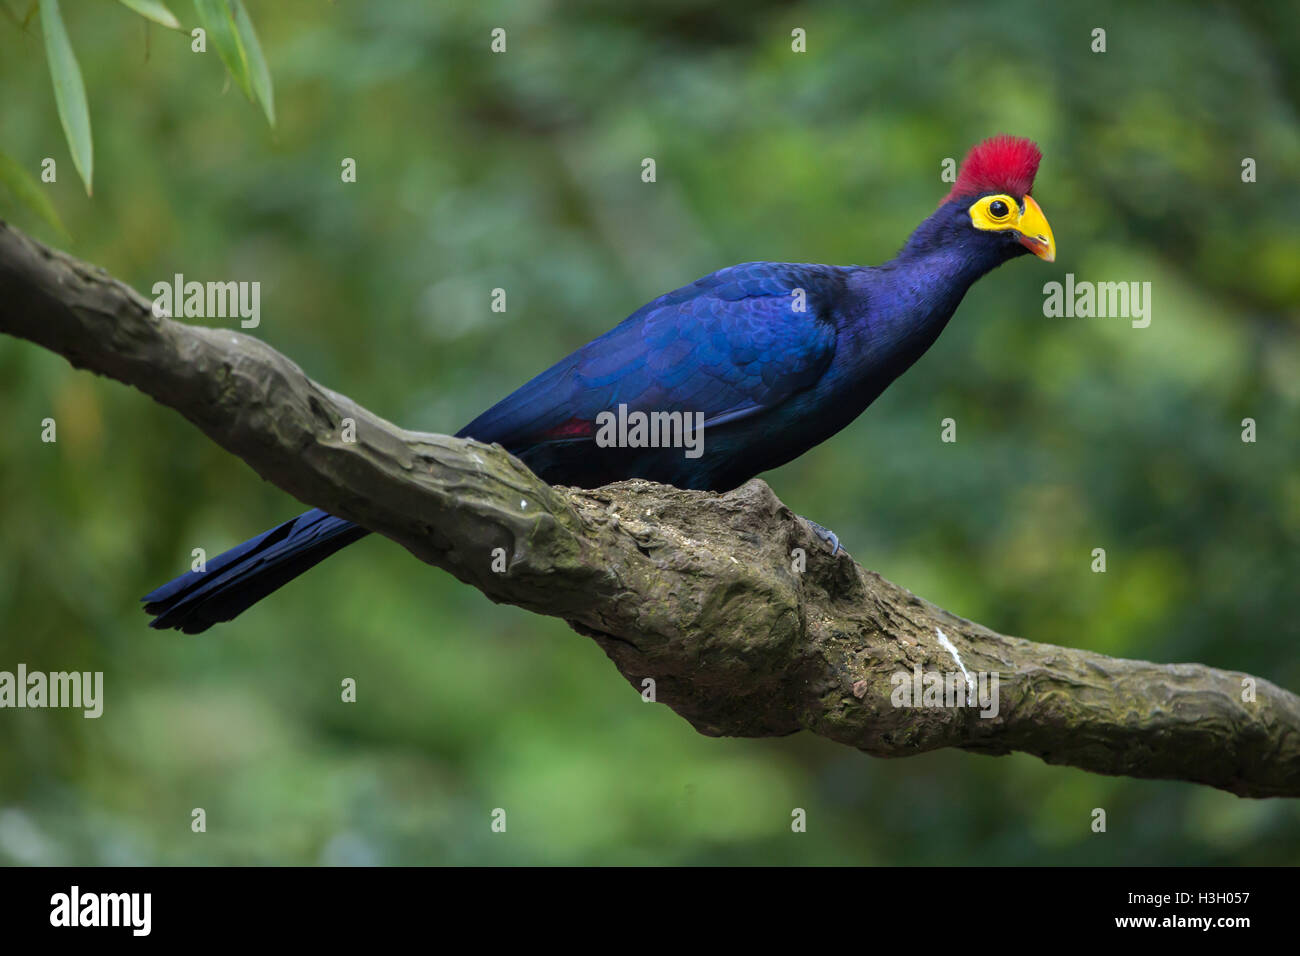 Lady Ross's turaco (Musophaga rossae), also known as the Ross's turaco. Wildlife animal. Stock Photo